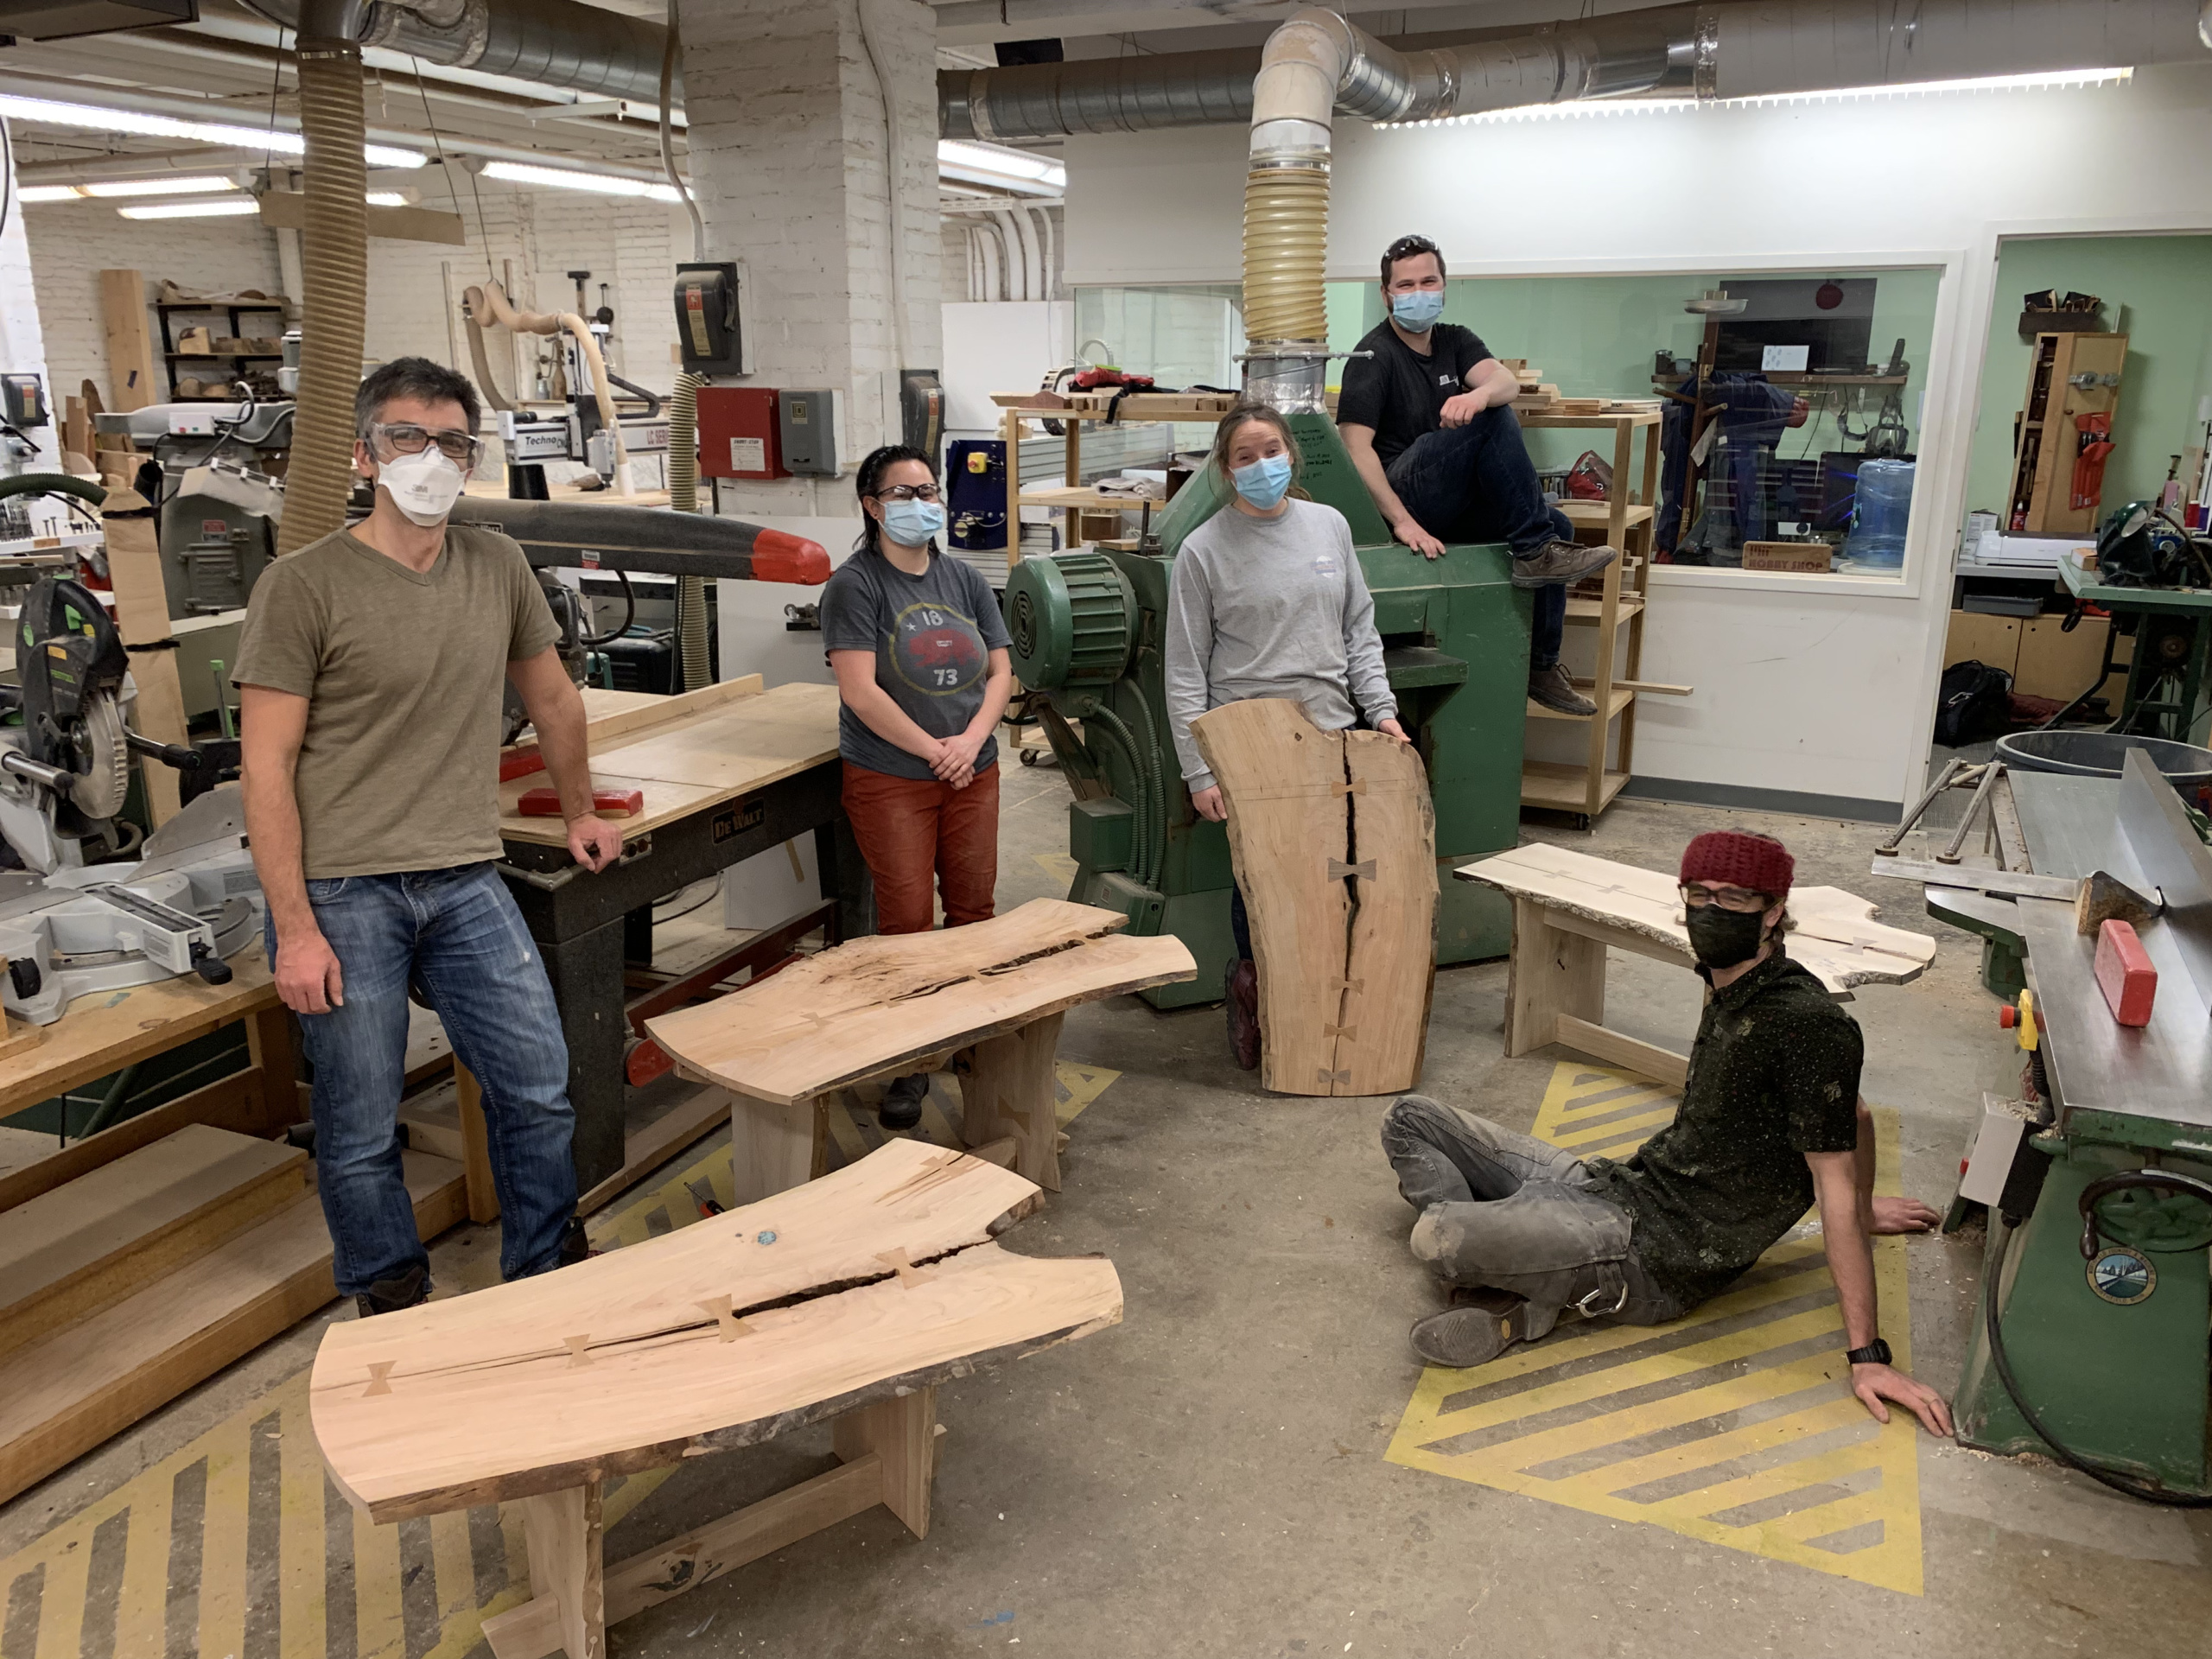 In January, we teach beginners wood working classes in the Hobby Shop. In 2022, I chose to teach a live-edge coffee table project. Despite the class being more complex than most entry level classes, the students excelled. Students learned basic machine use like the jointer, planer and table saw as well as hand tools, some CNC operation and complex joinery.